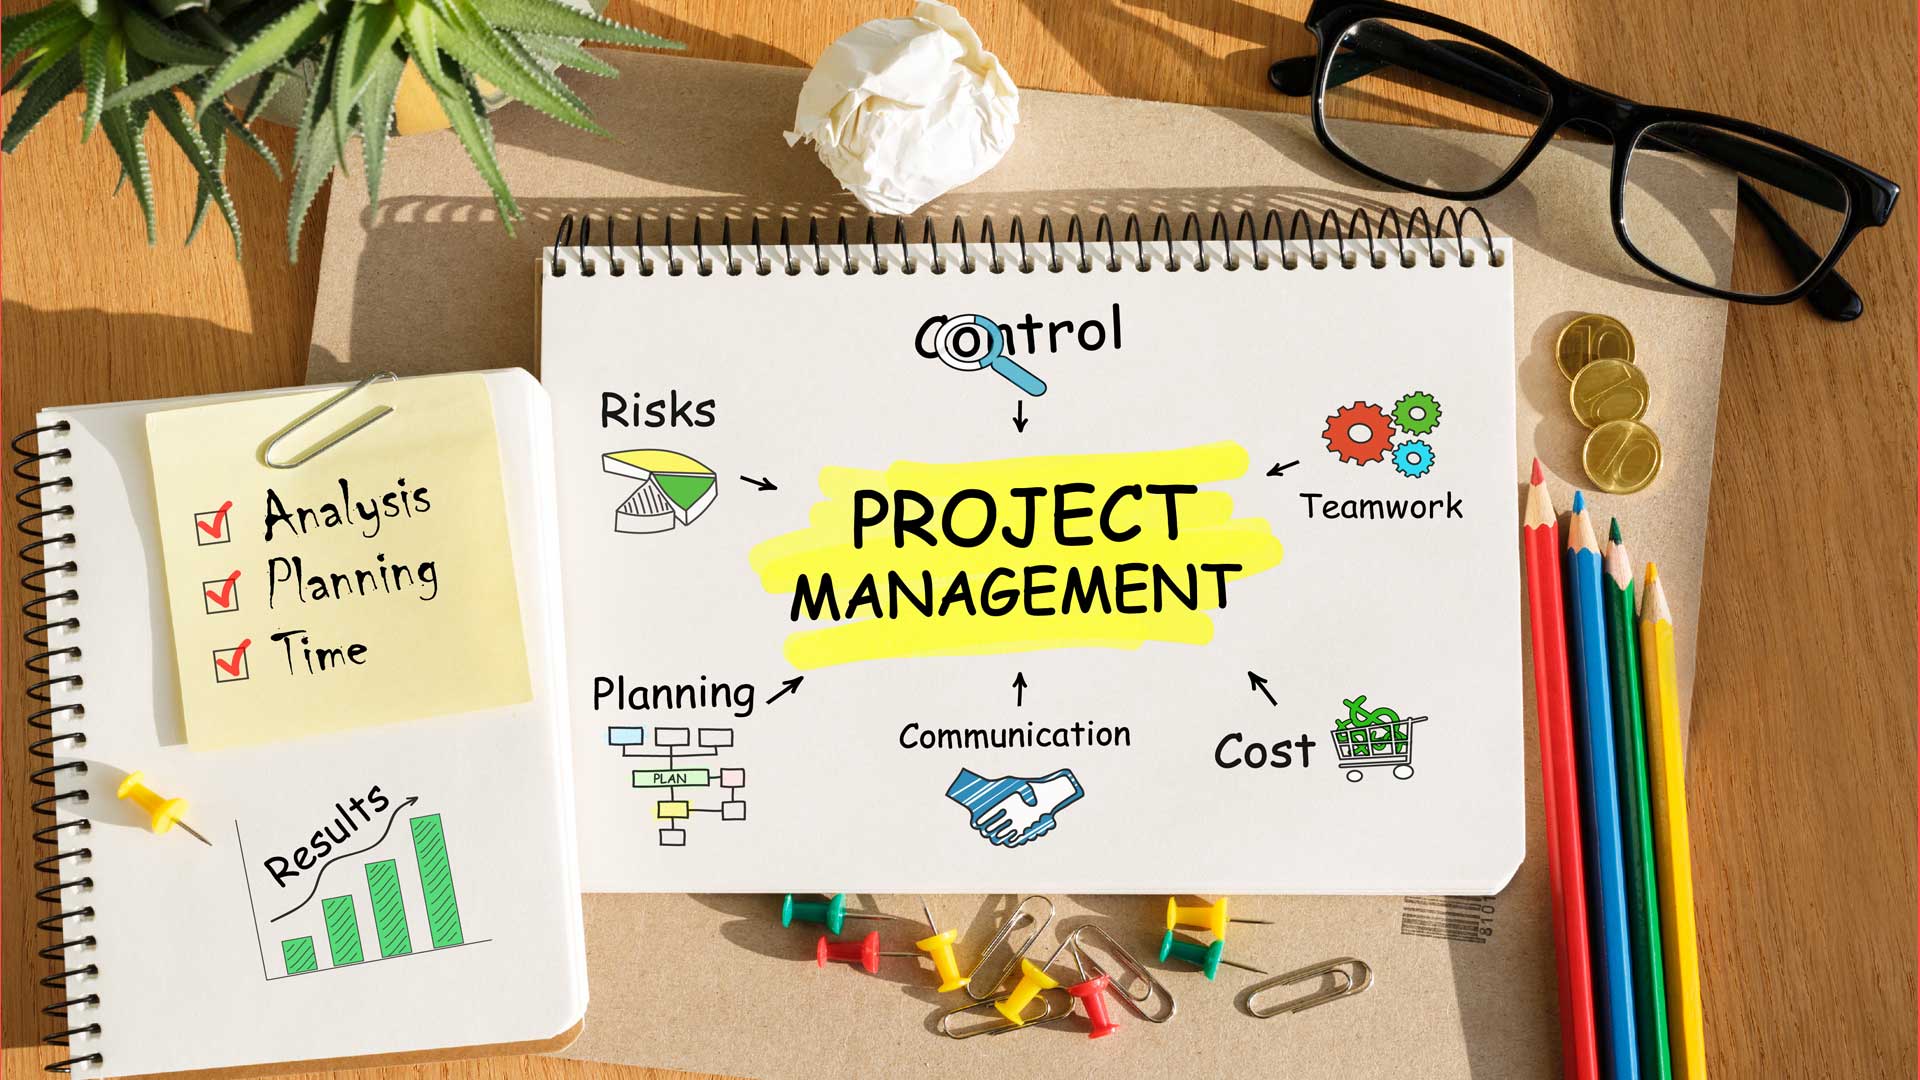 Project Management for Cannabis Projects